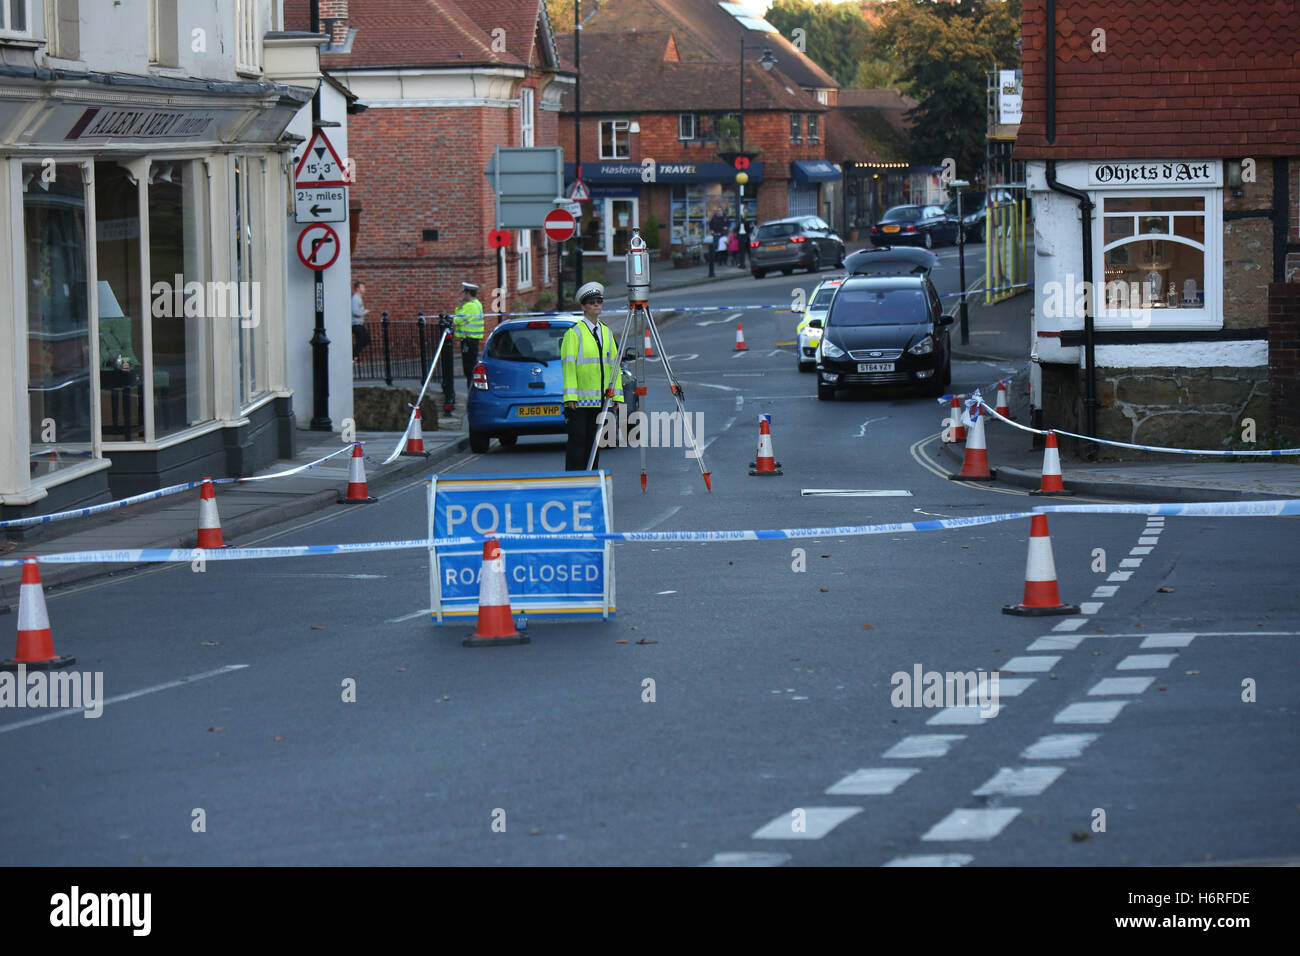 Haslemere Surrey  Monday 31st October 2016. A man in his 80’s  has been airlifted to  hospital following a serious collision  in Haslemere. Surrey Police have  confirmed  a man in his 80s has been taken to St George’s Hospital with serious head injuries.  It is believed  that moments before the man had been out shopping for shoes in the near by Cockerill Shoes. Staff who witnesses the incident ran  with first aid kits to offer assistance  before the arrival of the emergency services. Credit:  uknip/Alamy Live News Stock Photo